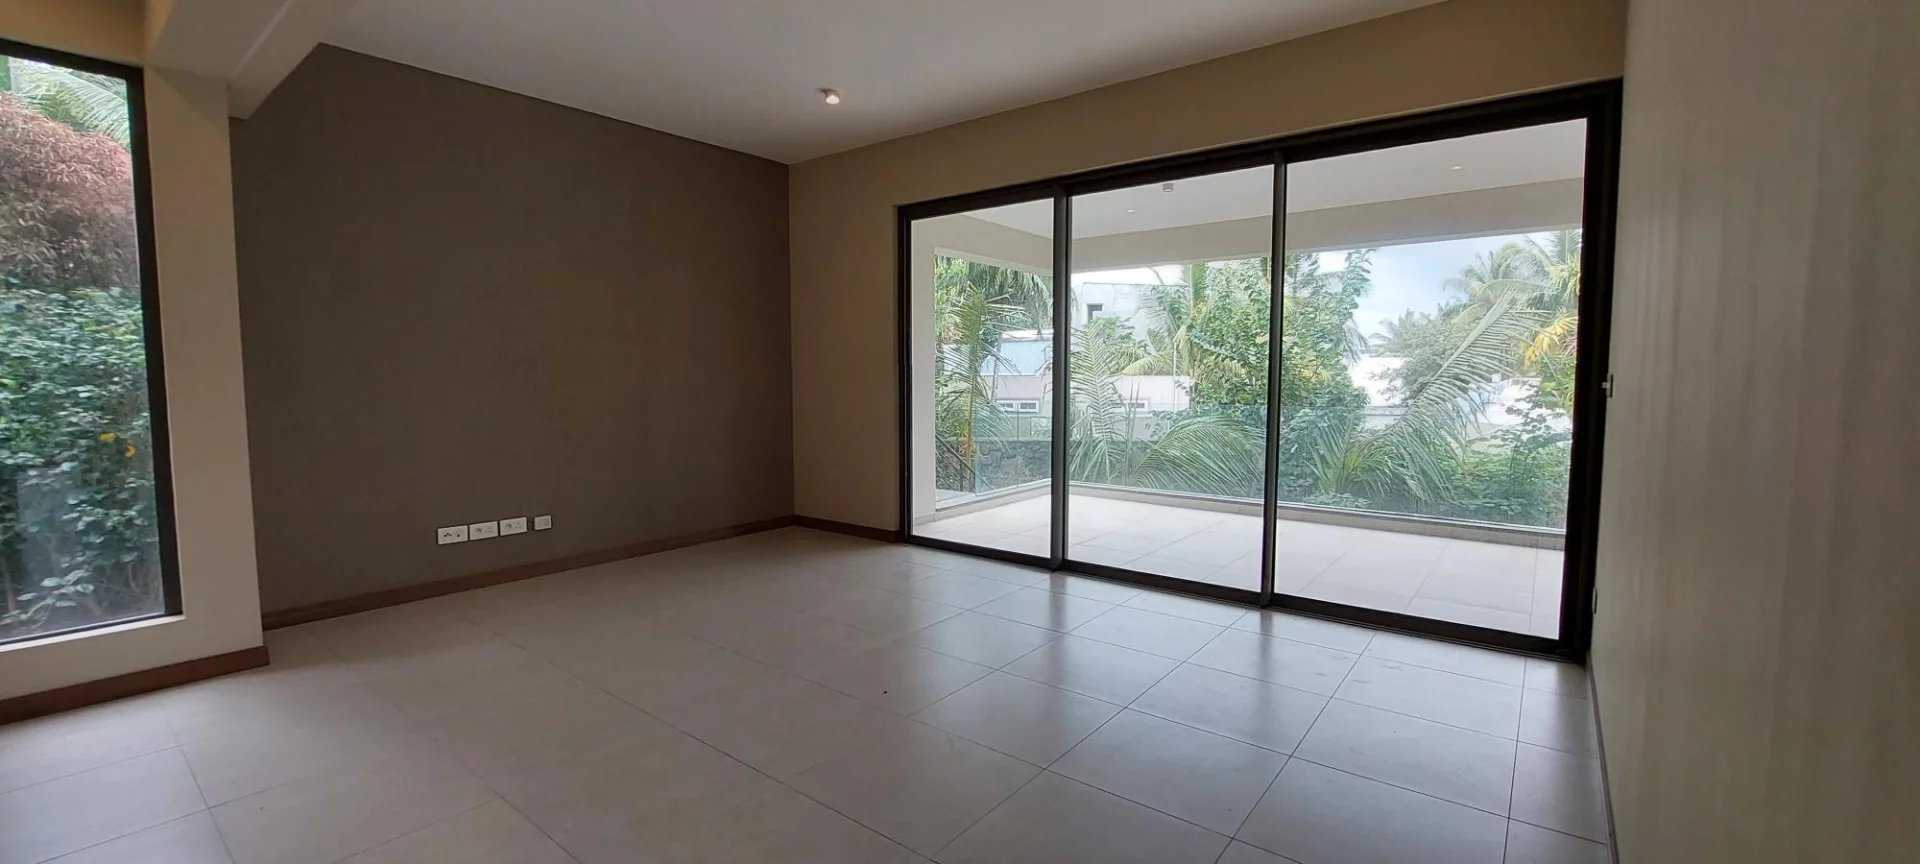 Piso Grand Baie  -  ref 82632094 (picture 2)